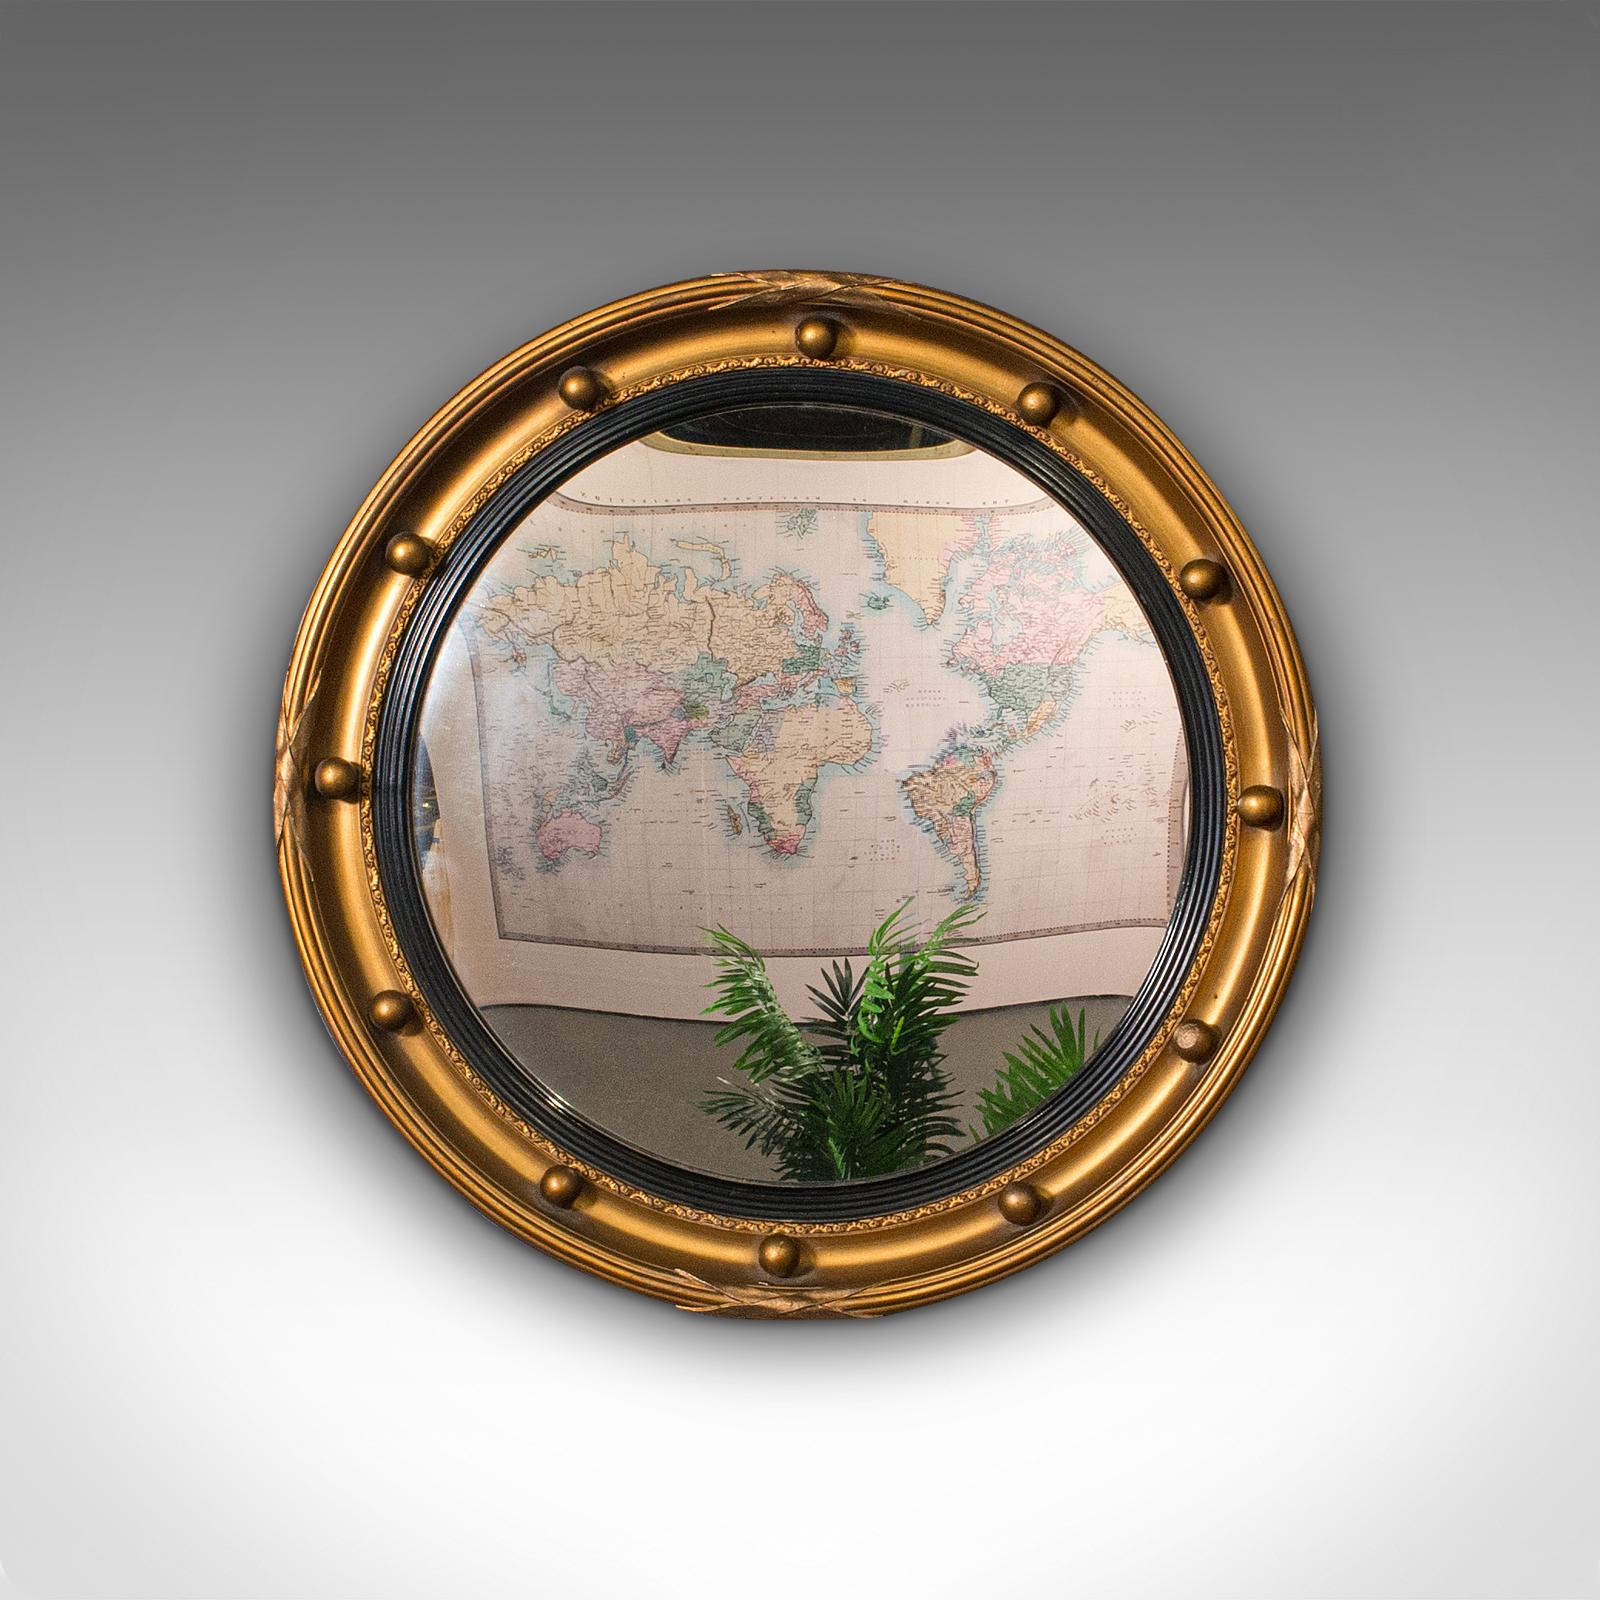 This is a vintage porthole mirror. An English, mildly convex decorative hall or lounge mirror in Regency revival taste, dating to the mid 20th century, circa 1940.

Charming mirror of petite proportion and colourful finish
Displays a desirable